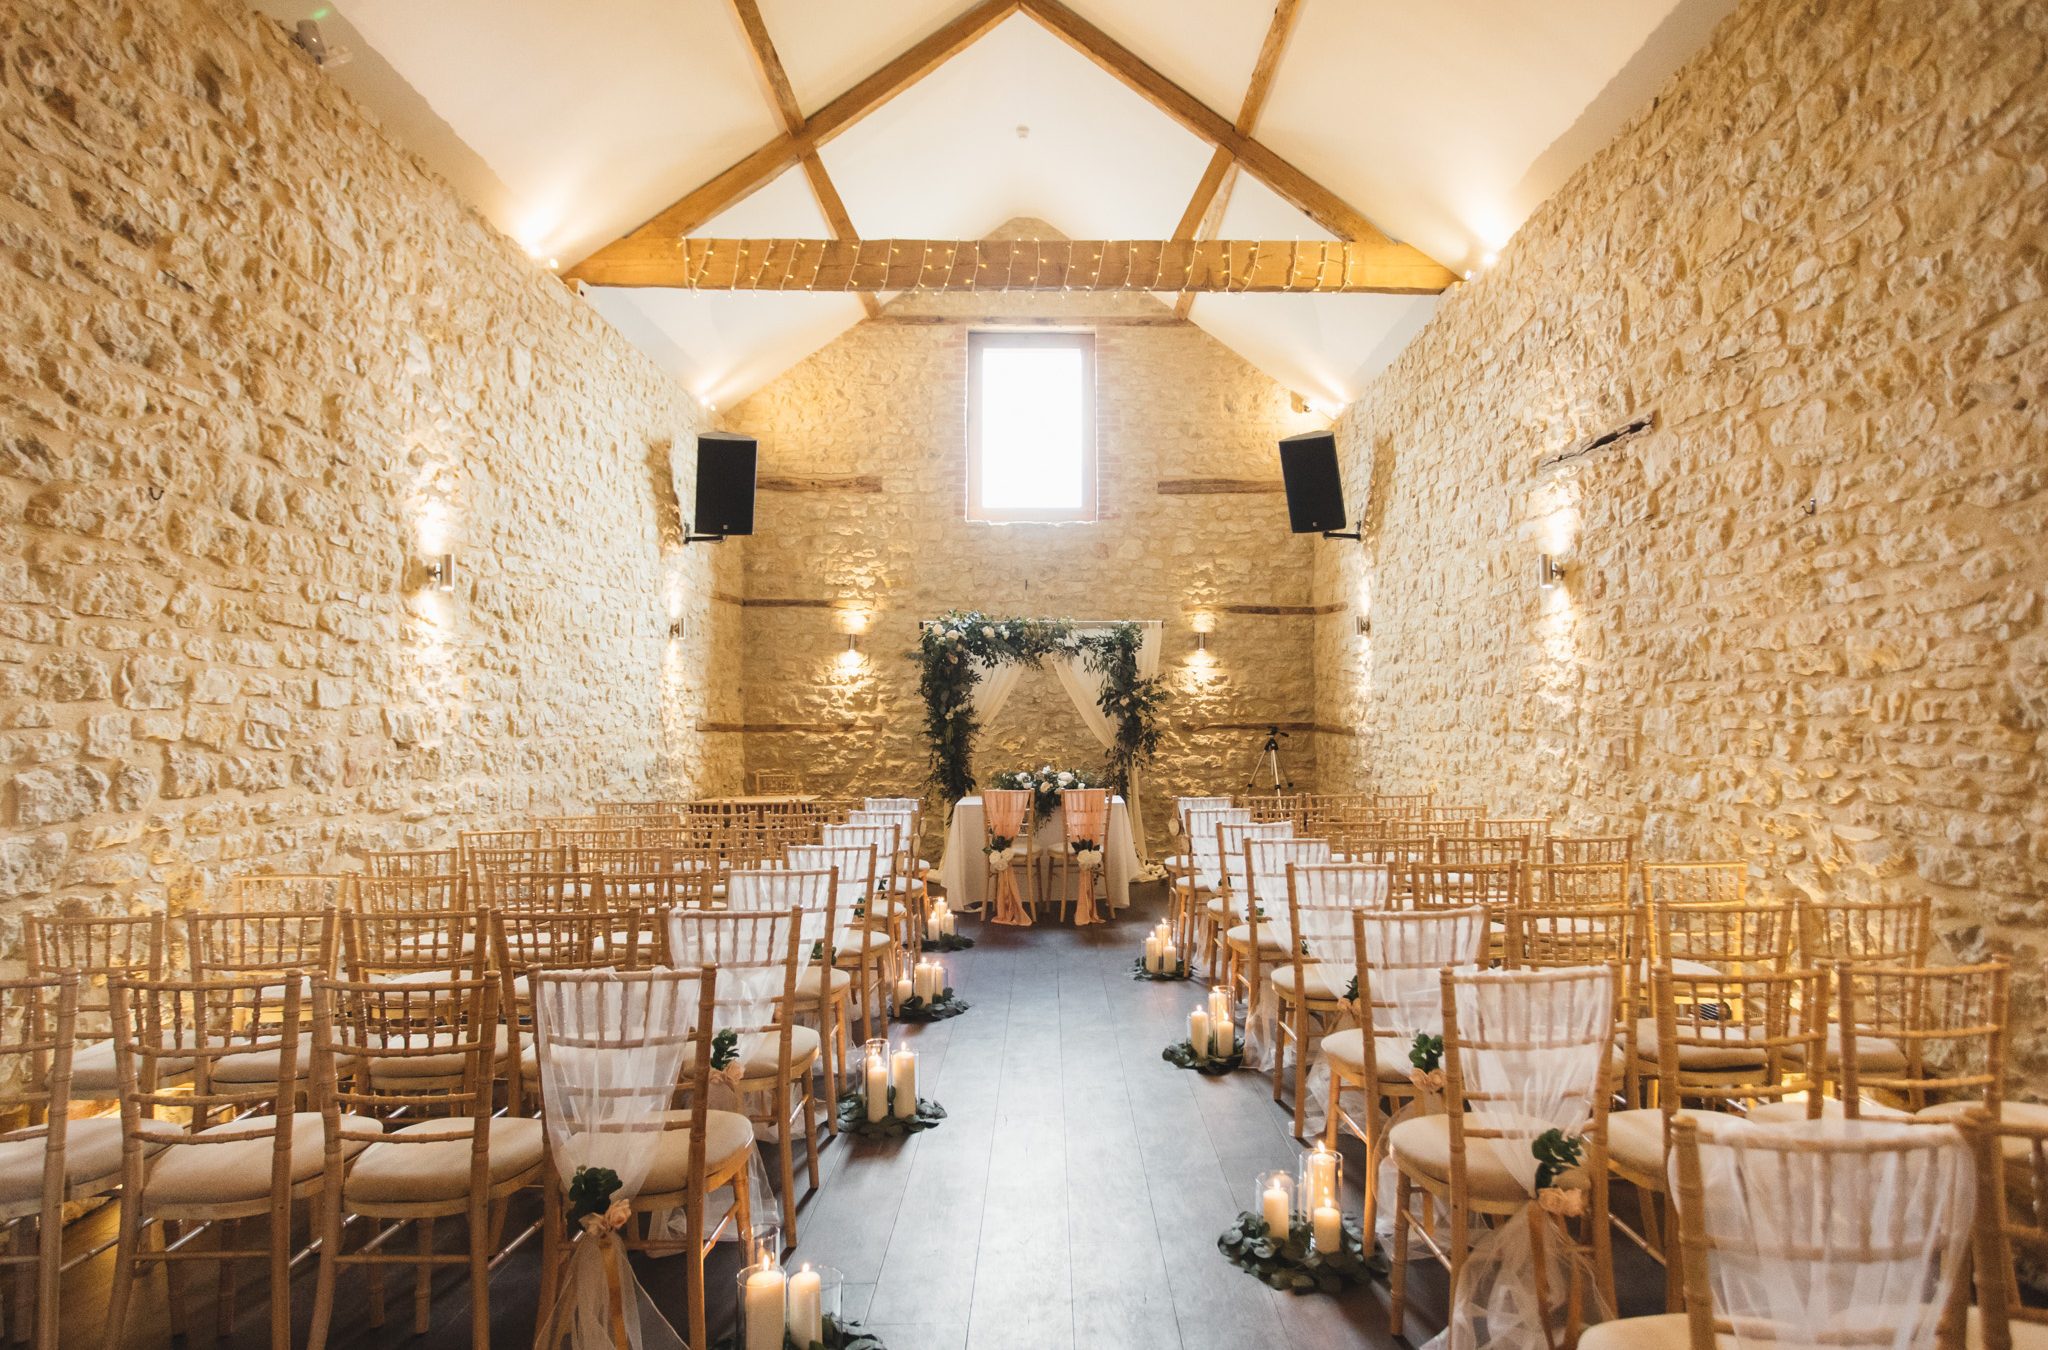 Wedding barn with decorated chairs and candles